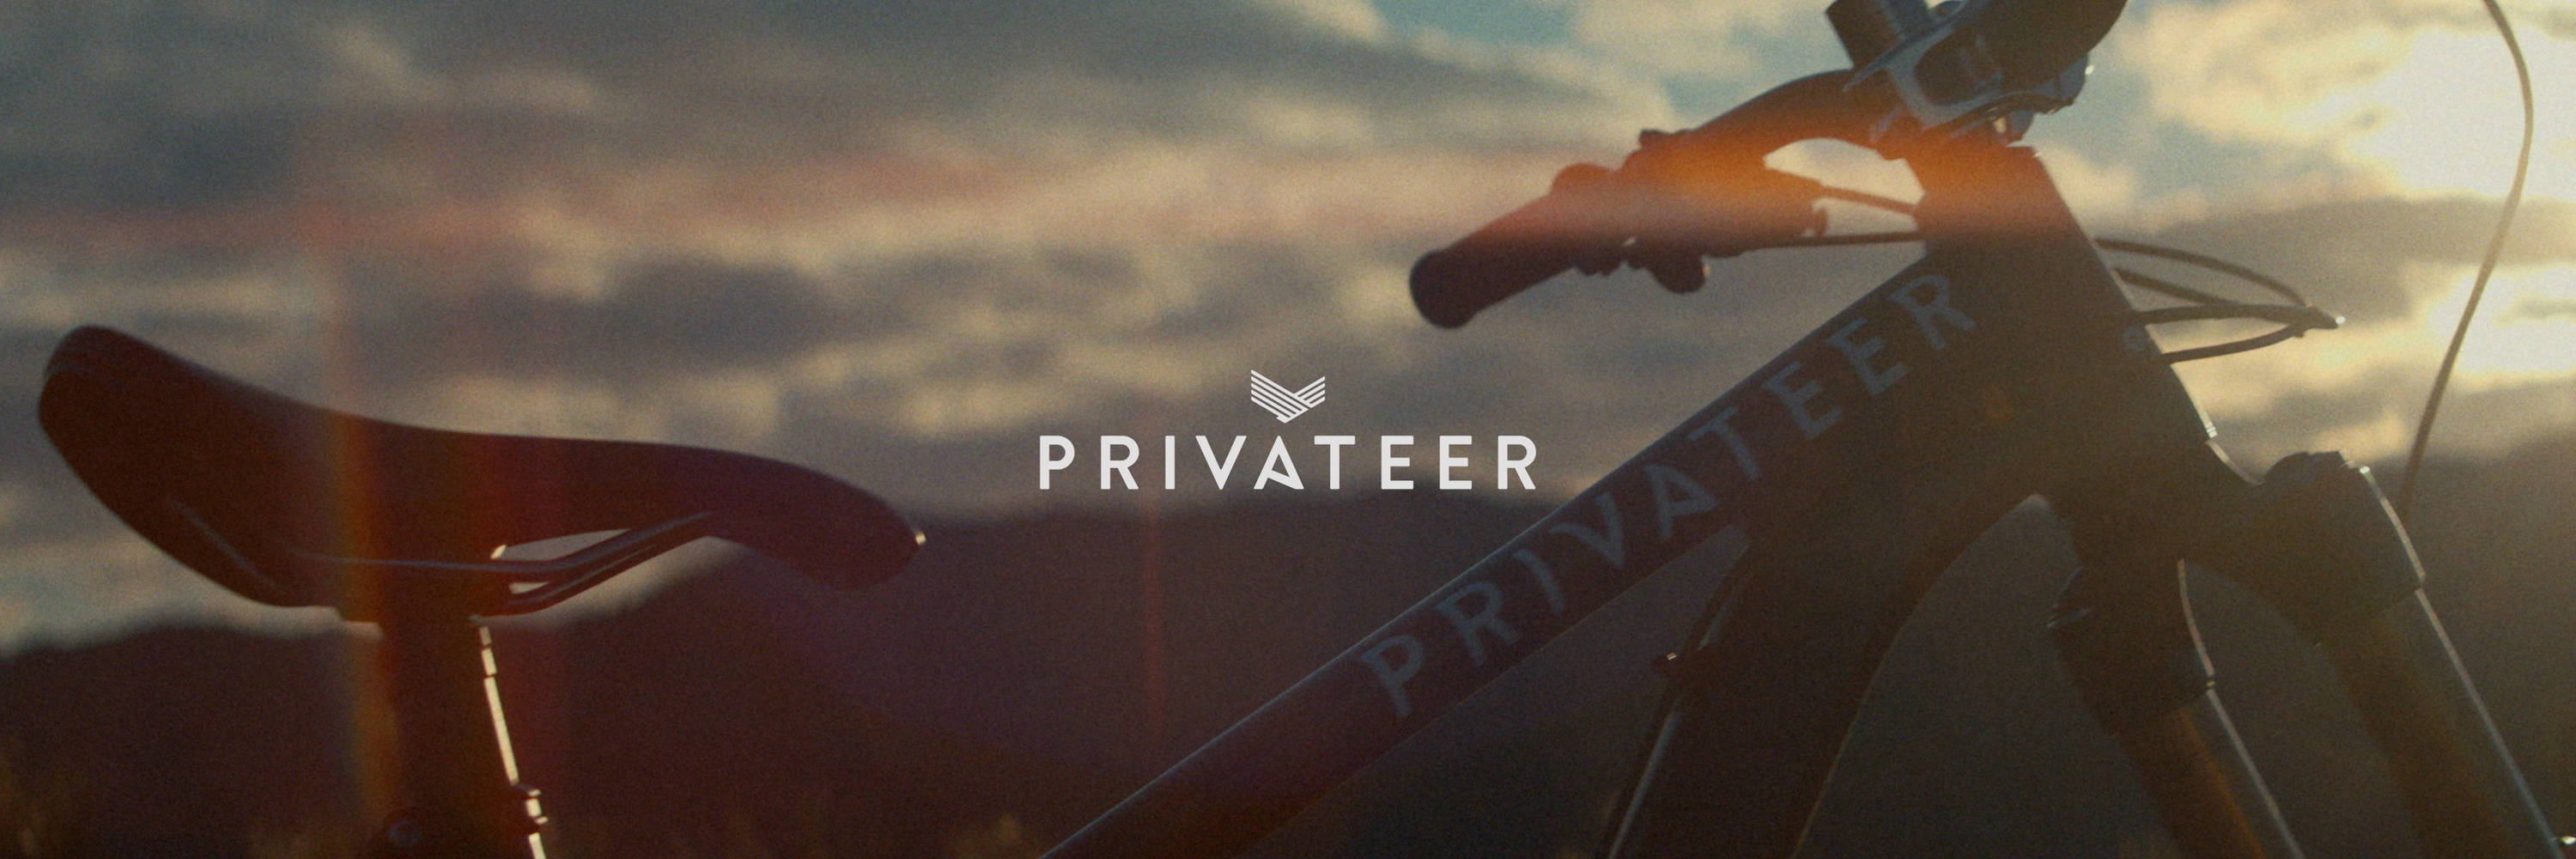 Privateer Bikes logo and Privateer 161